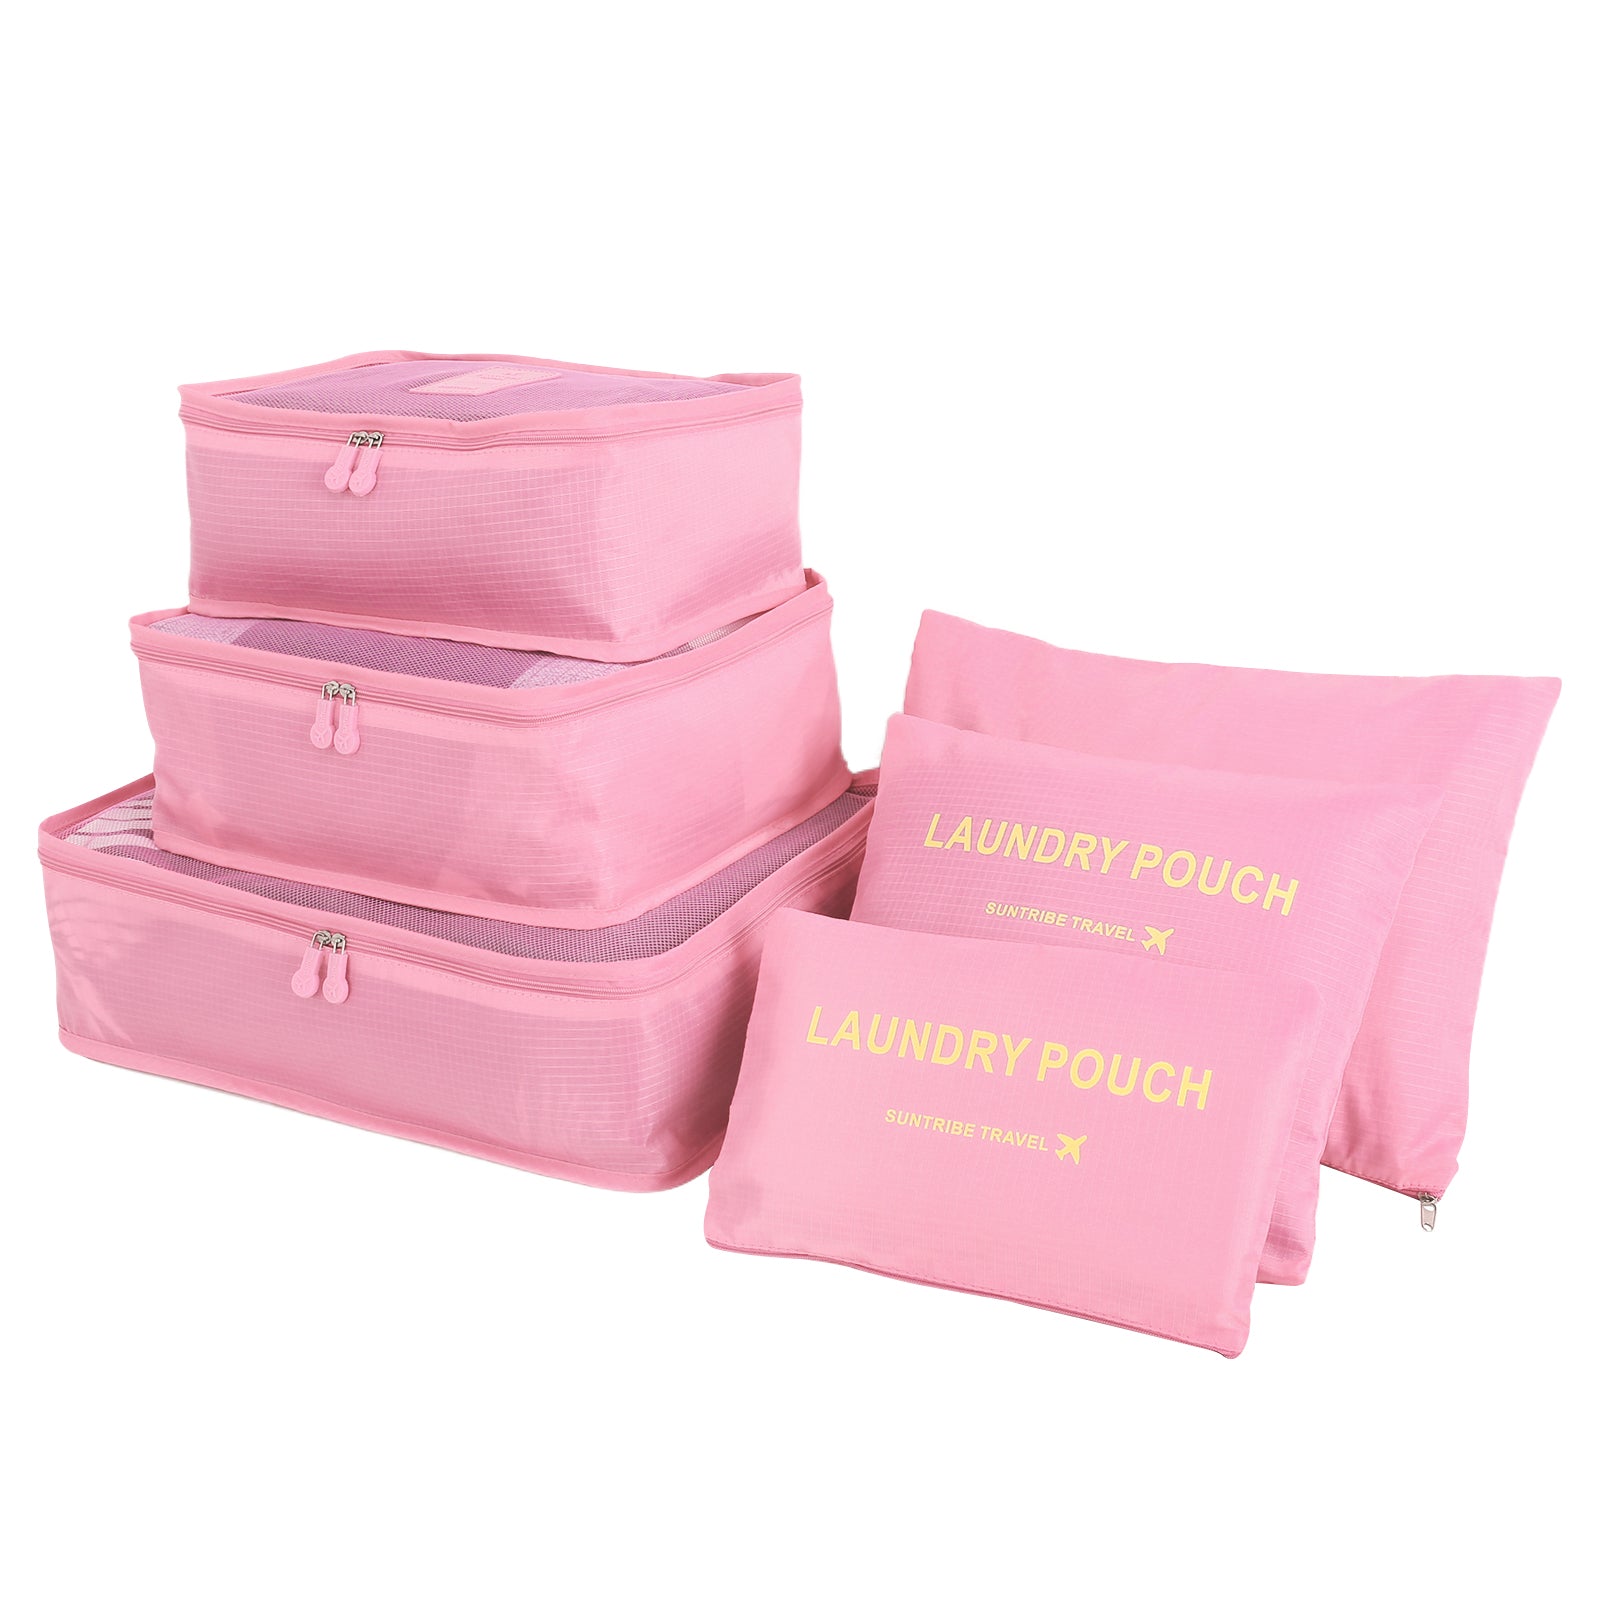 6-piece Luggage Packing Cubes for Travel Organization